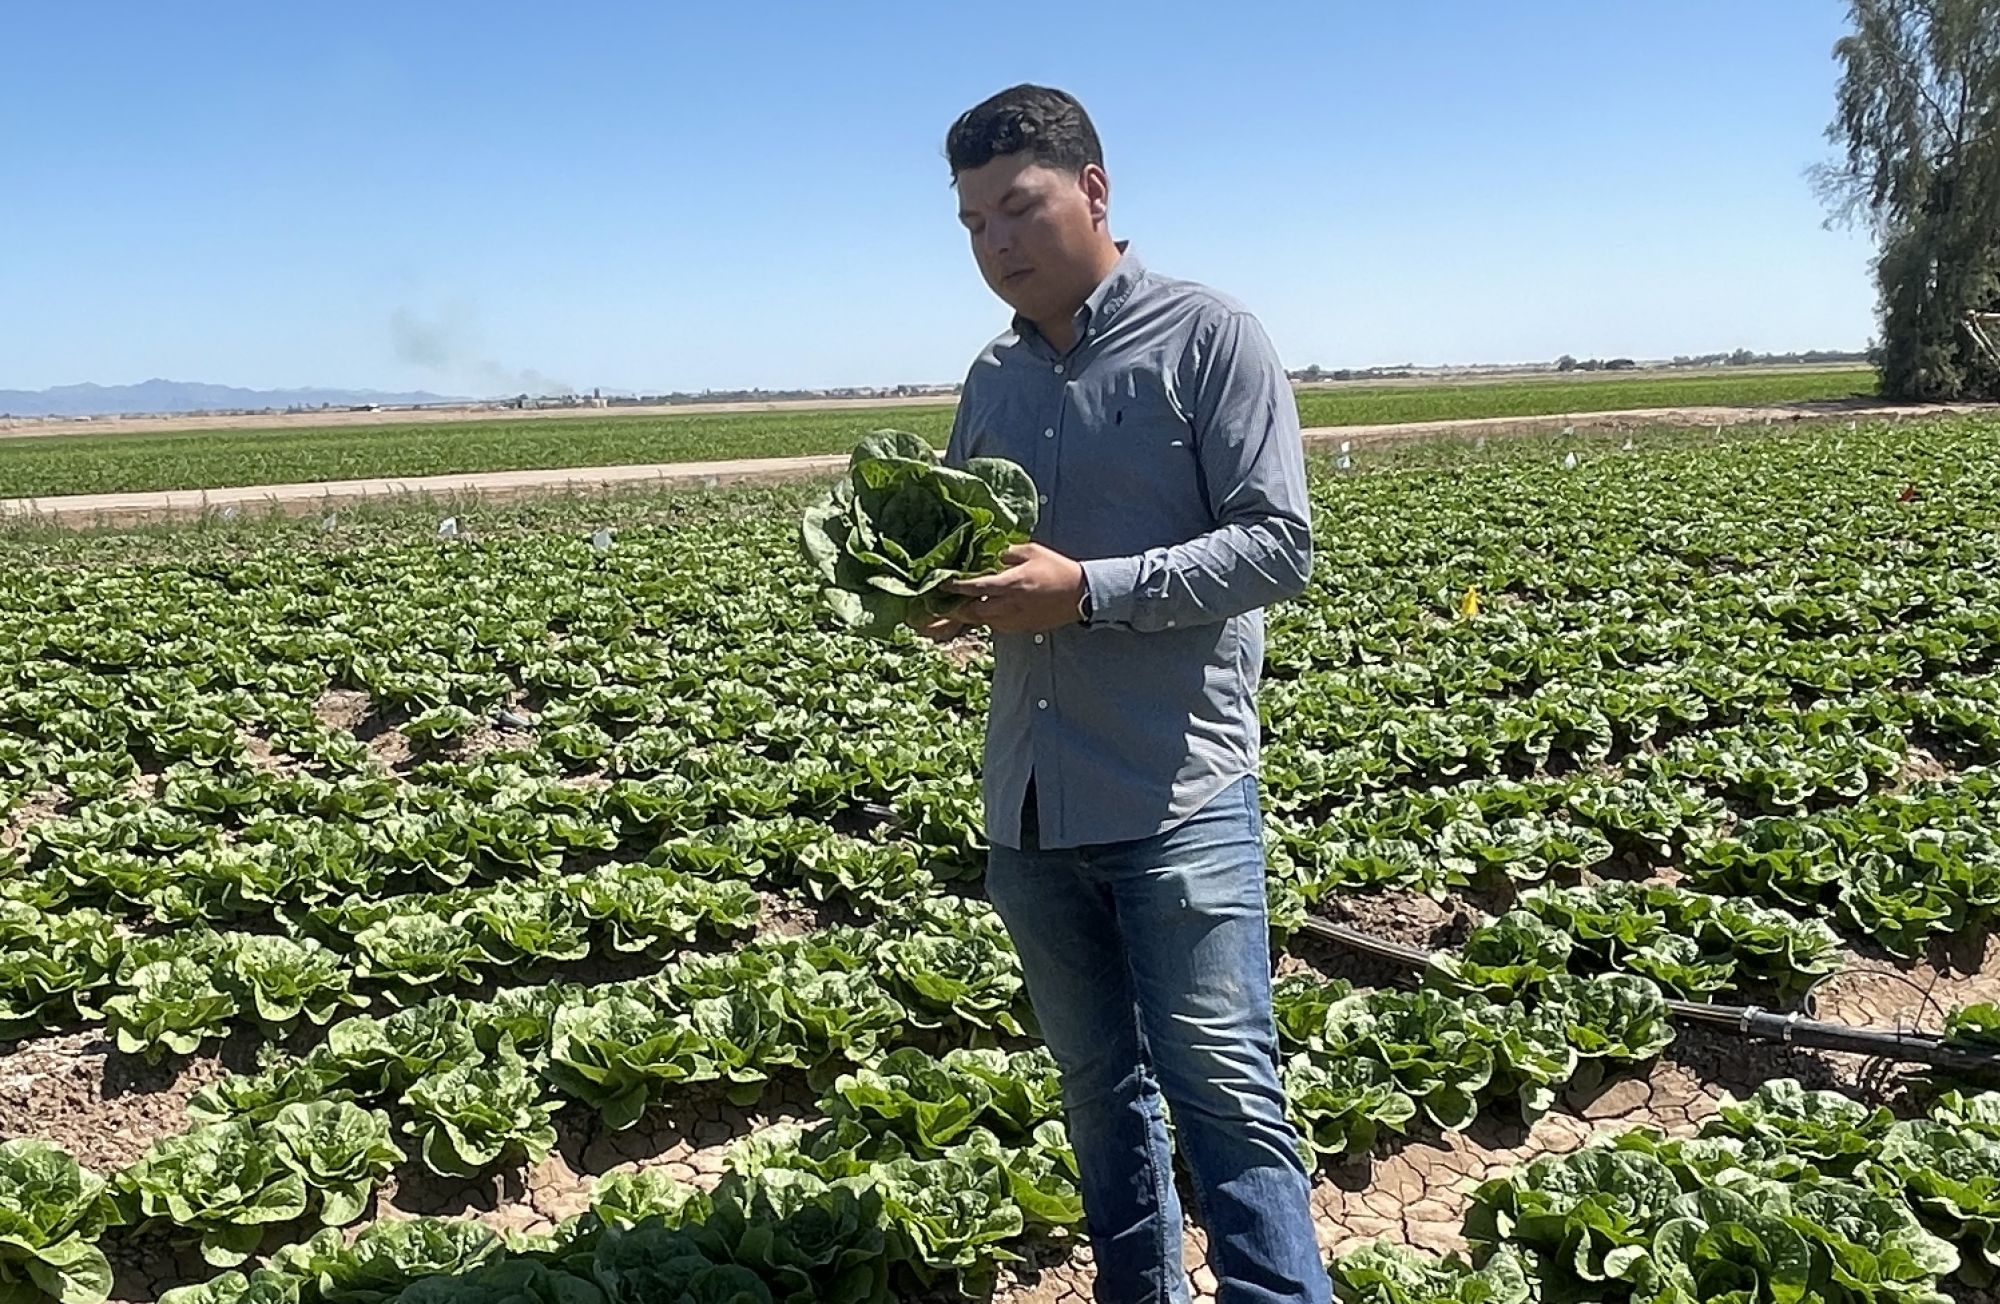 Alan Cruz, an agricultural systems management major at University of Arizona Yuma, stands in a field of leafy greens.